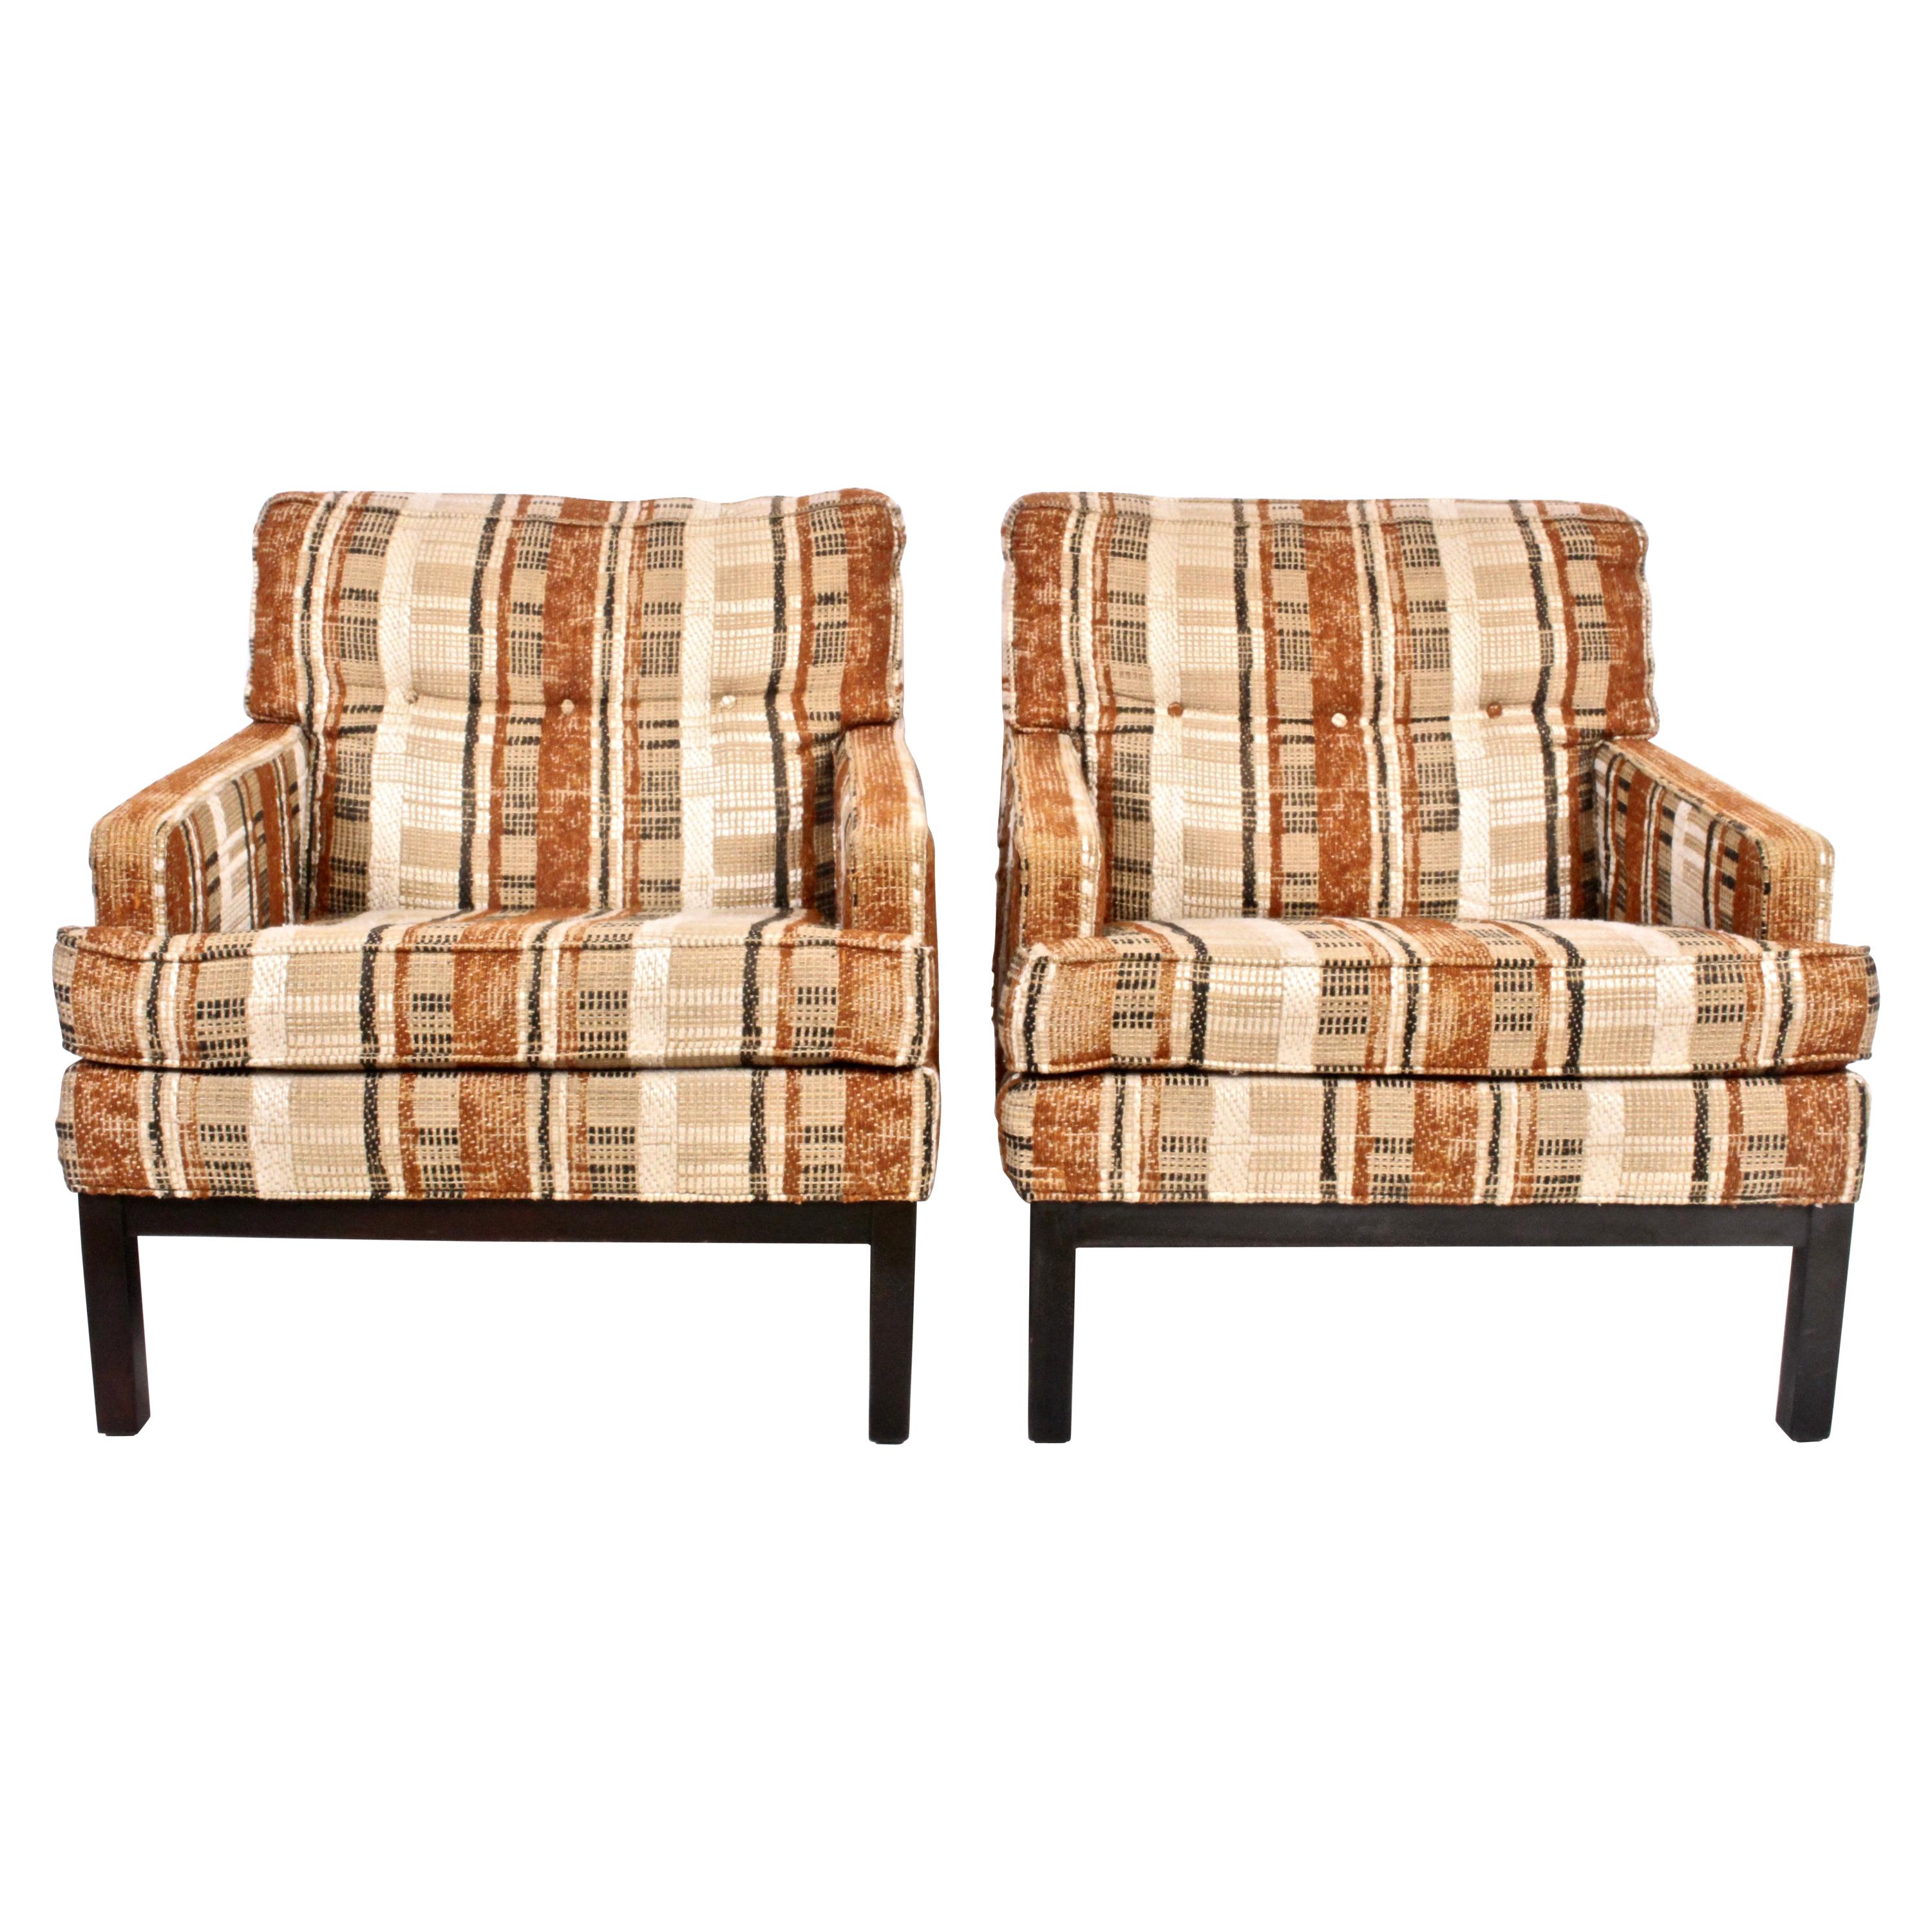 Pair of Harvey Probber for Directional Custom Club Chairs with Matching Ottoman